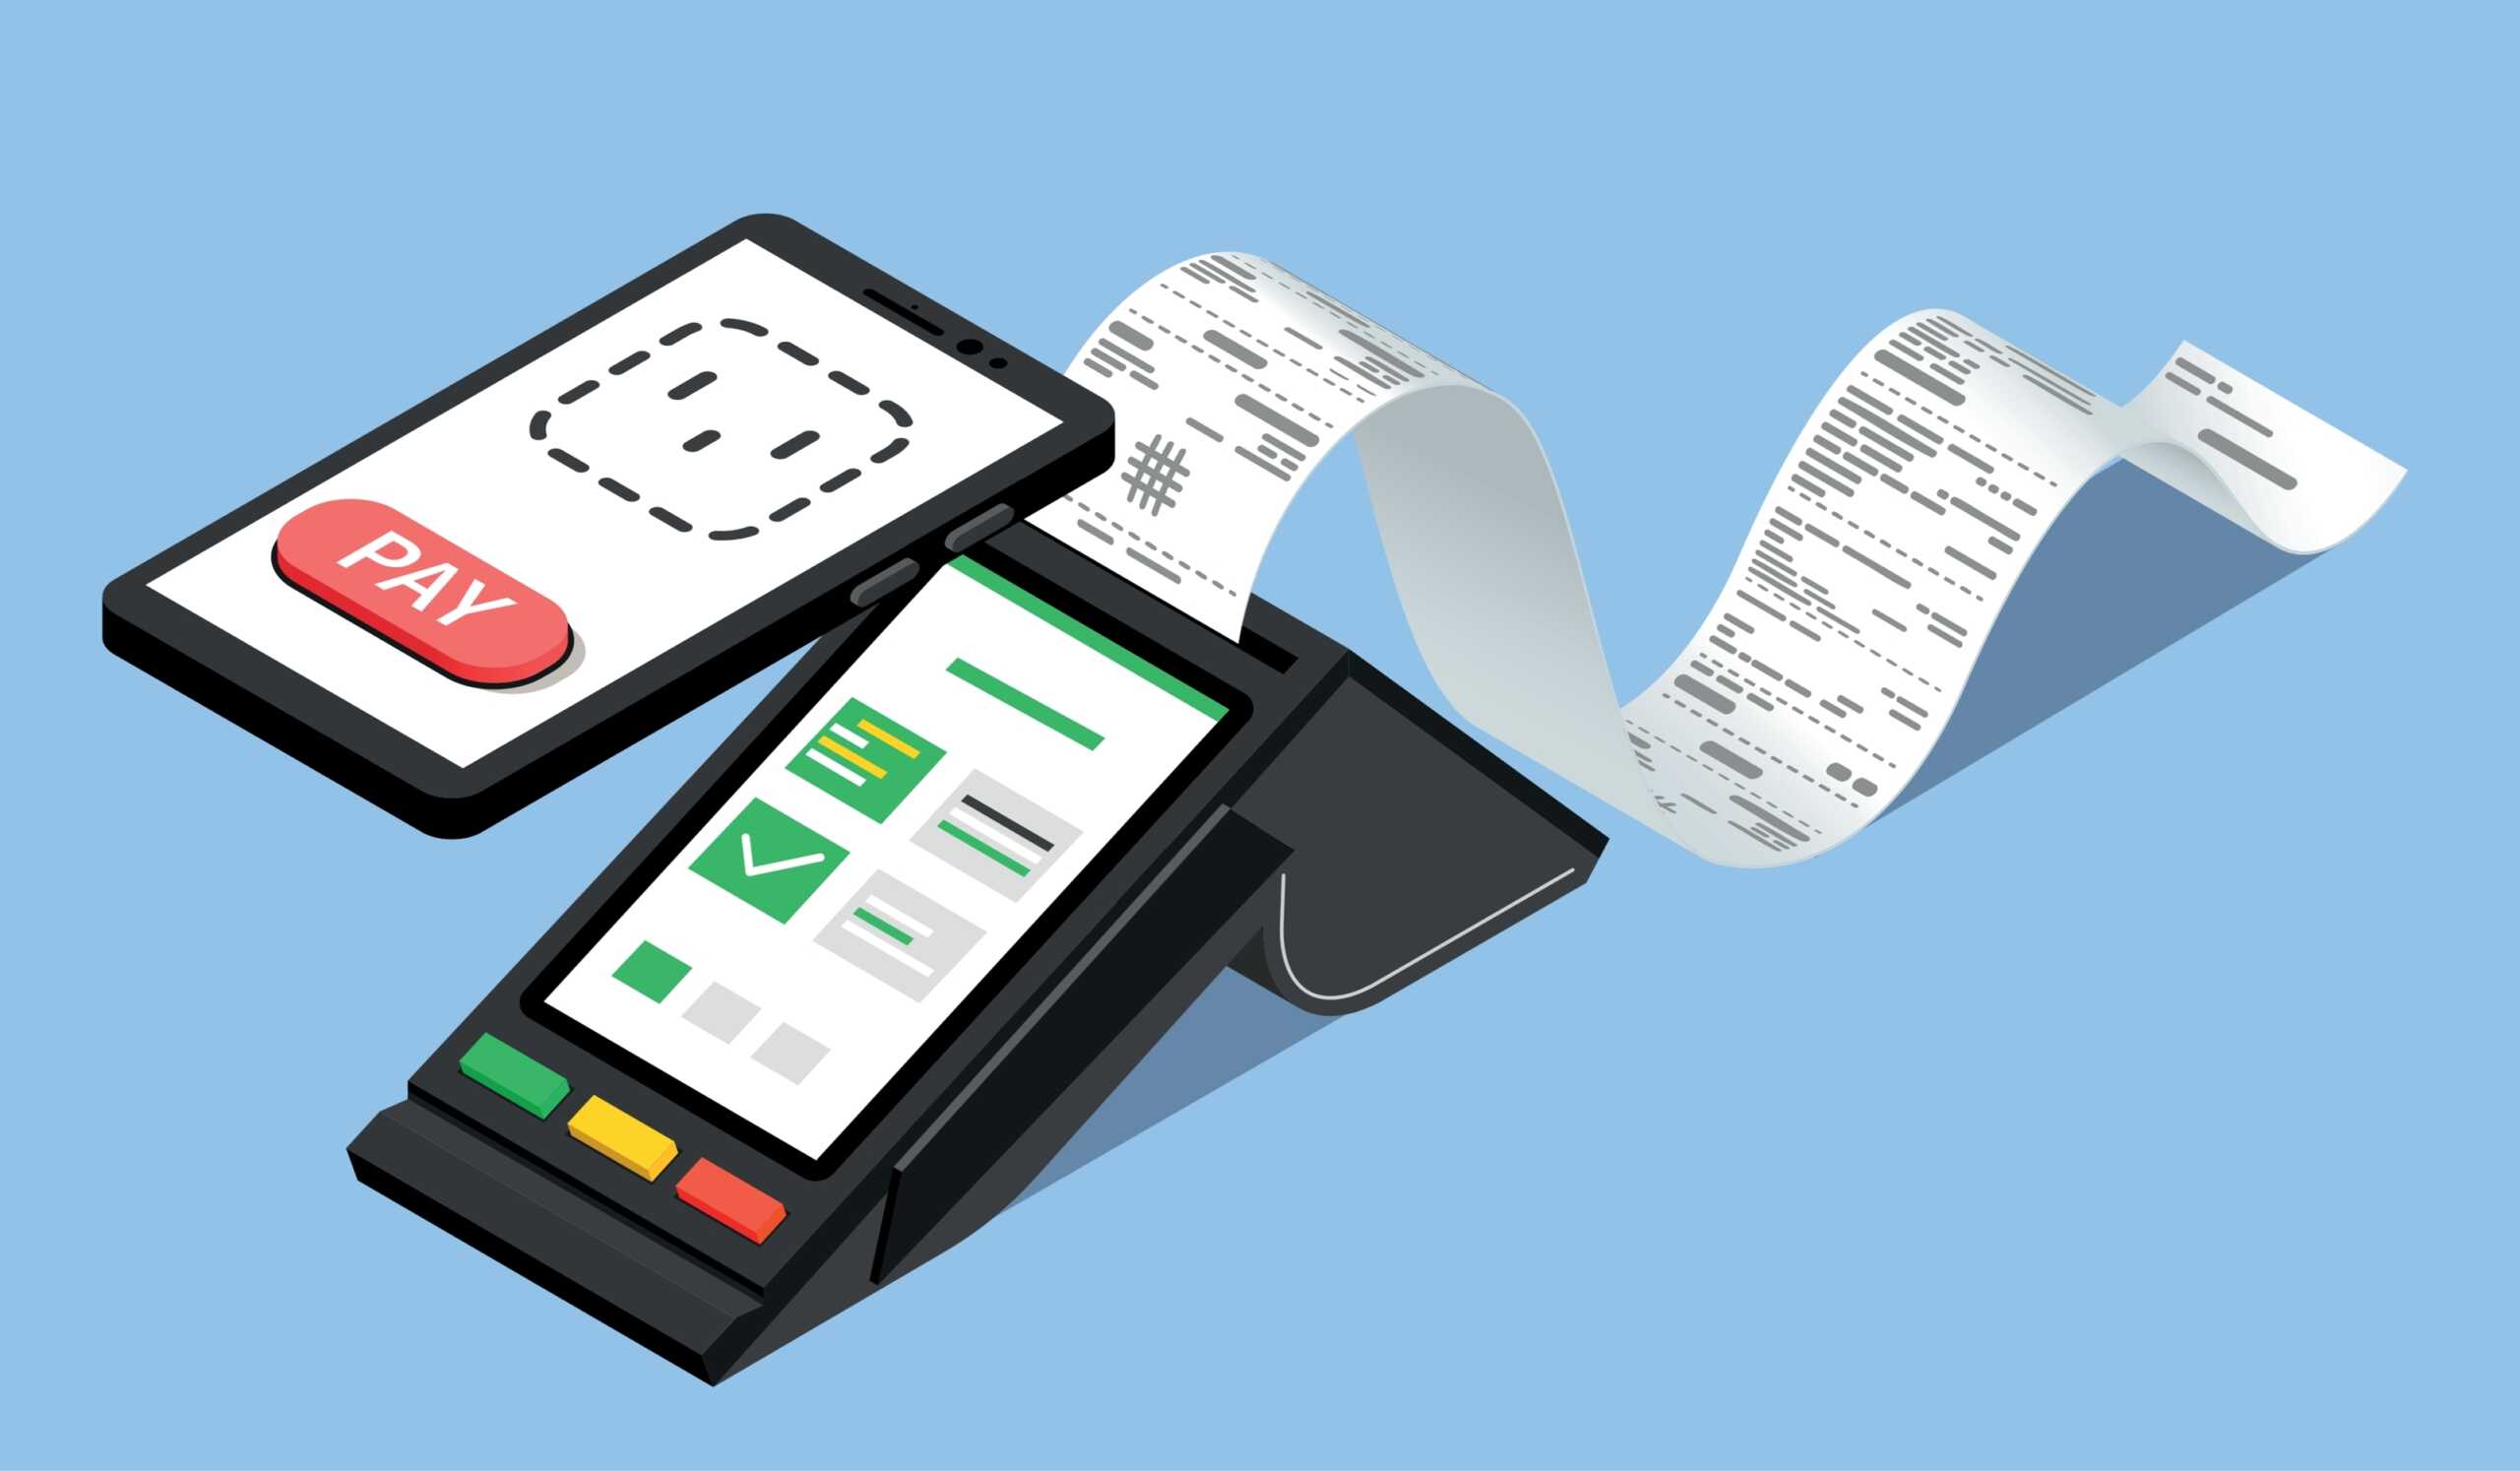 Payment process is access easily online and on smart devices with PrintReach Pay